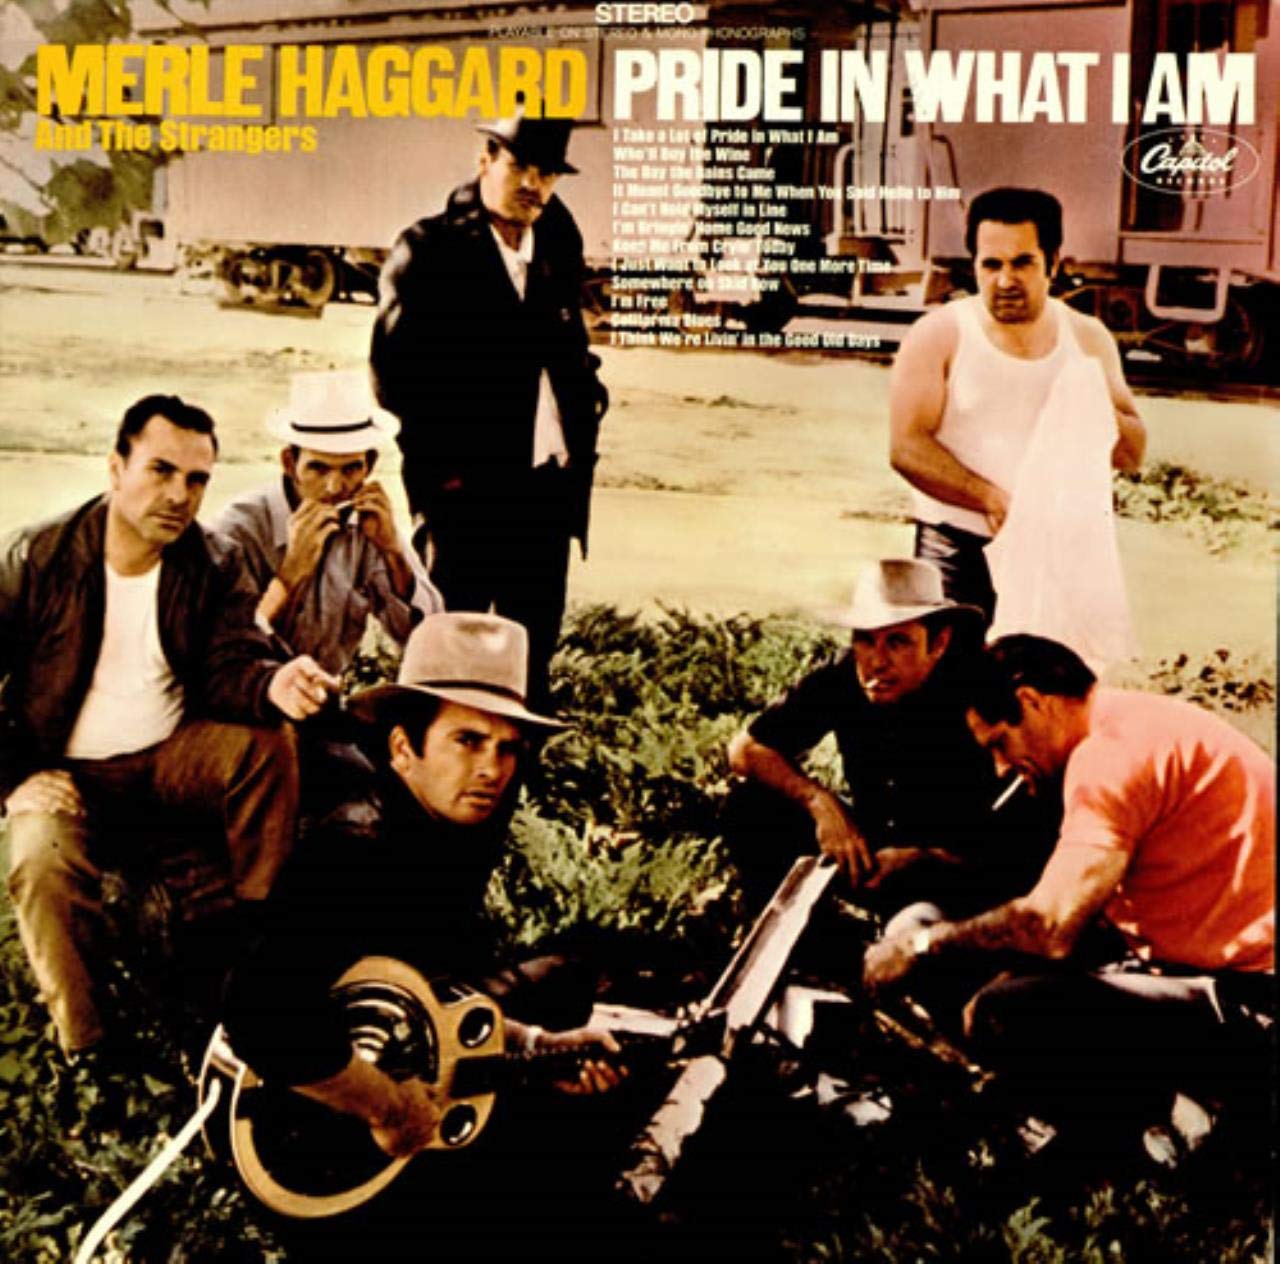 "I Take A Lot of Pride In What I Am" is a fan favorite from the 1970, "Fightin' Side of Me" live album. The introduction says it all. The Houselights blink, then dim. The crowd quiets. Then the intro and the man they've been waiting for. This is Merle Haggard - Live!